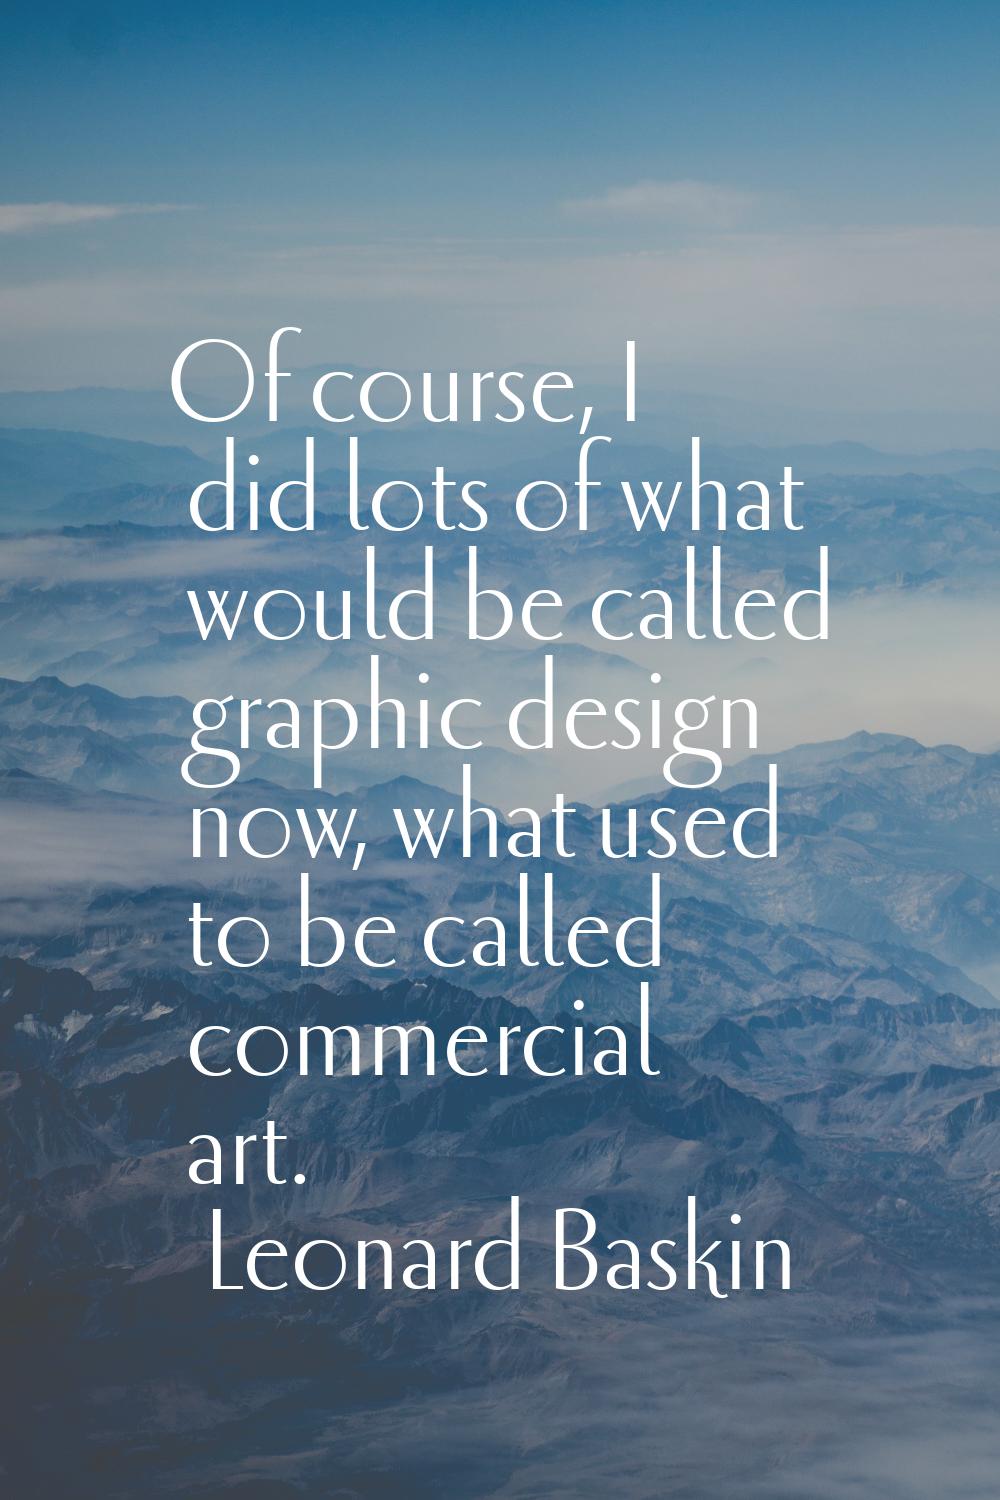 Of course, I did lots of what would be called graphic design now, what used to be called commercial